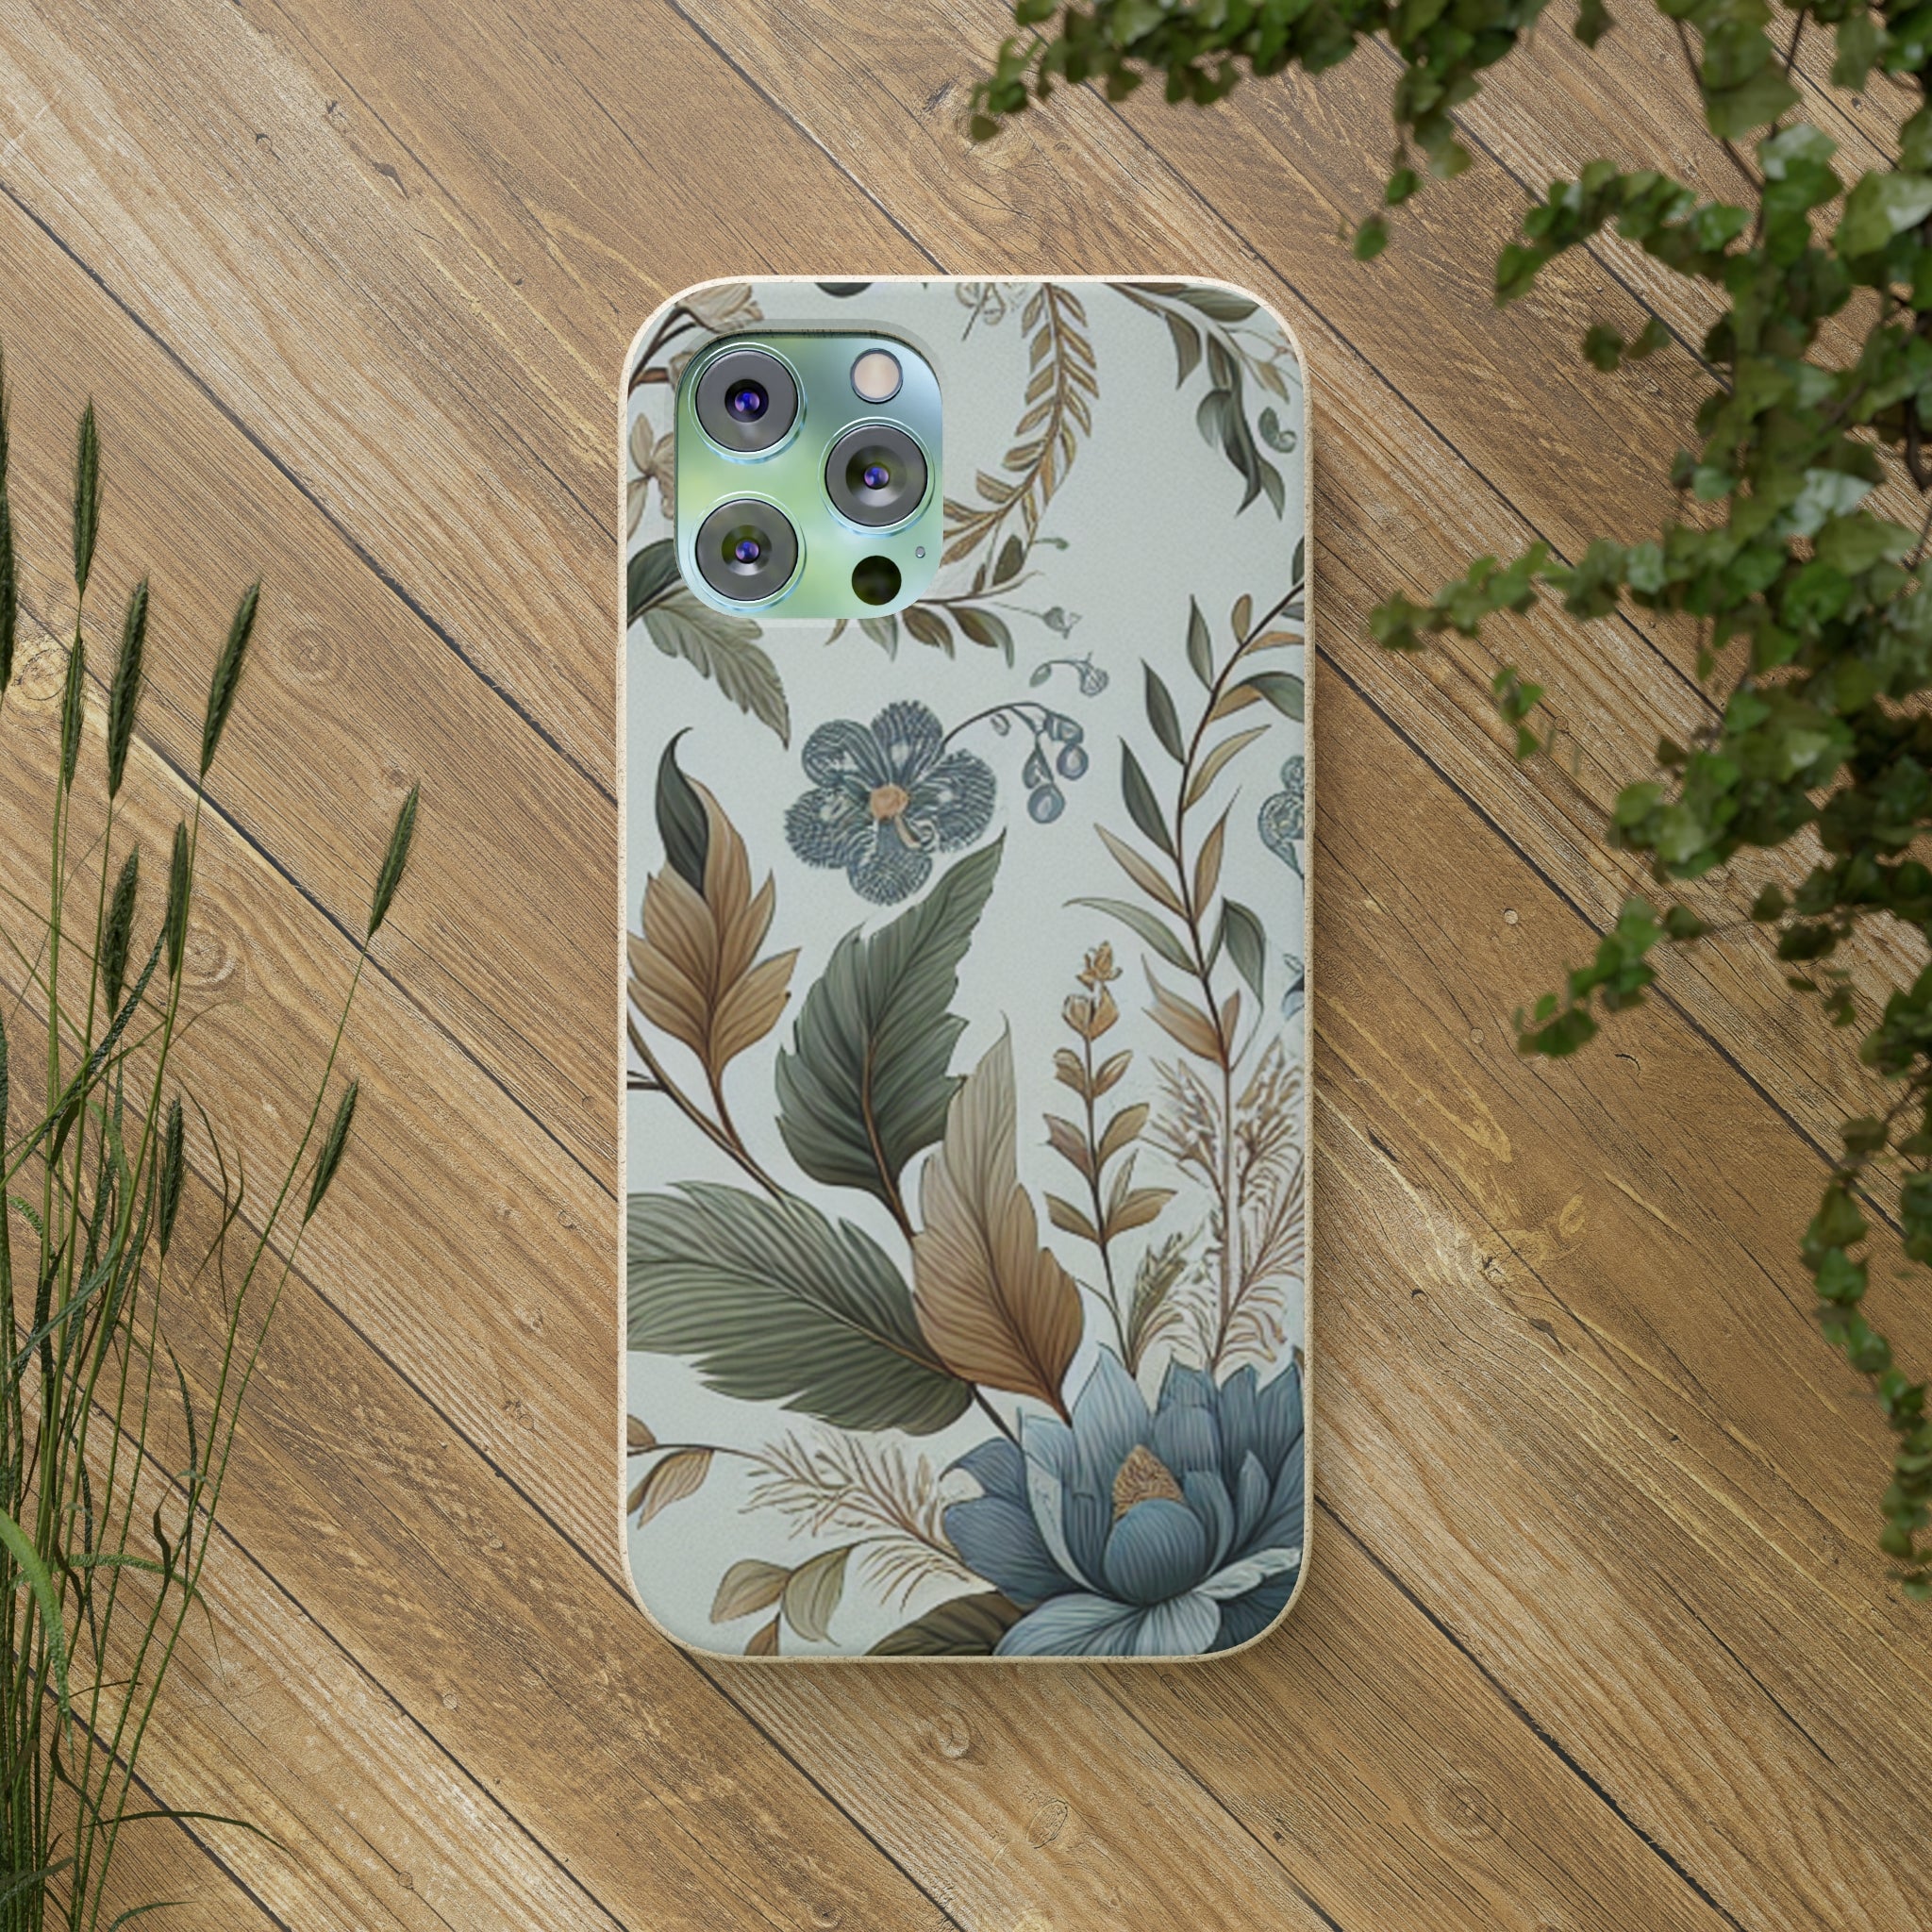 Galen Stone - Biodegradable iPhone Cases